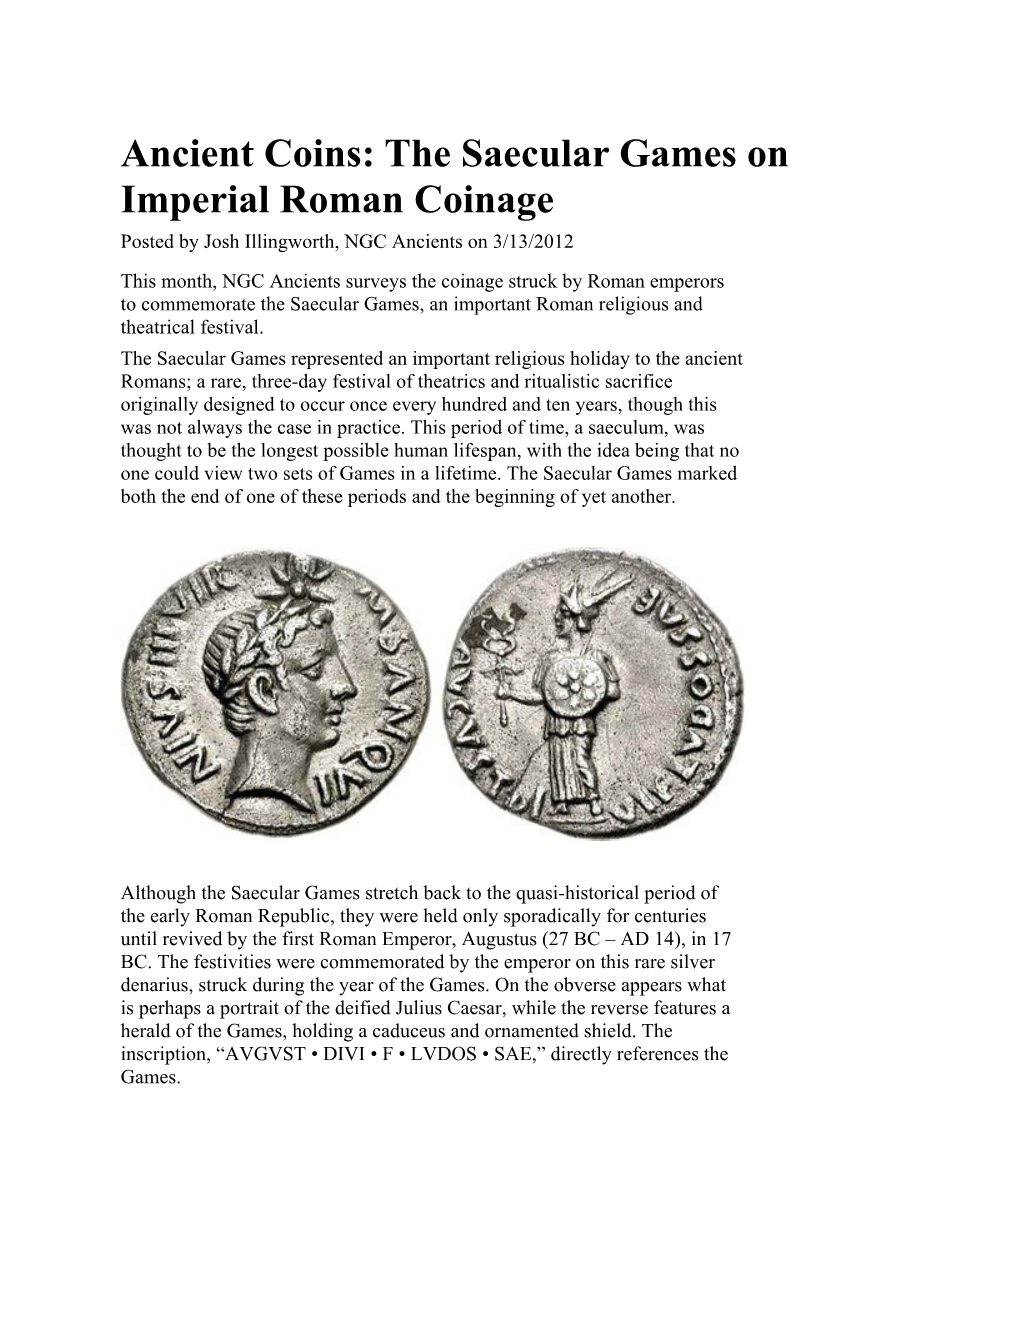 The Saecular Games on Imperial Roman Coinage